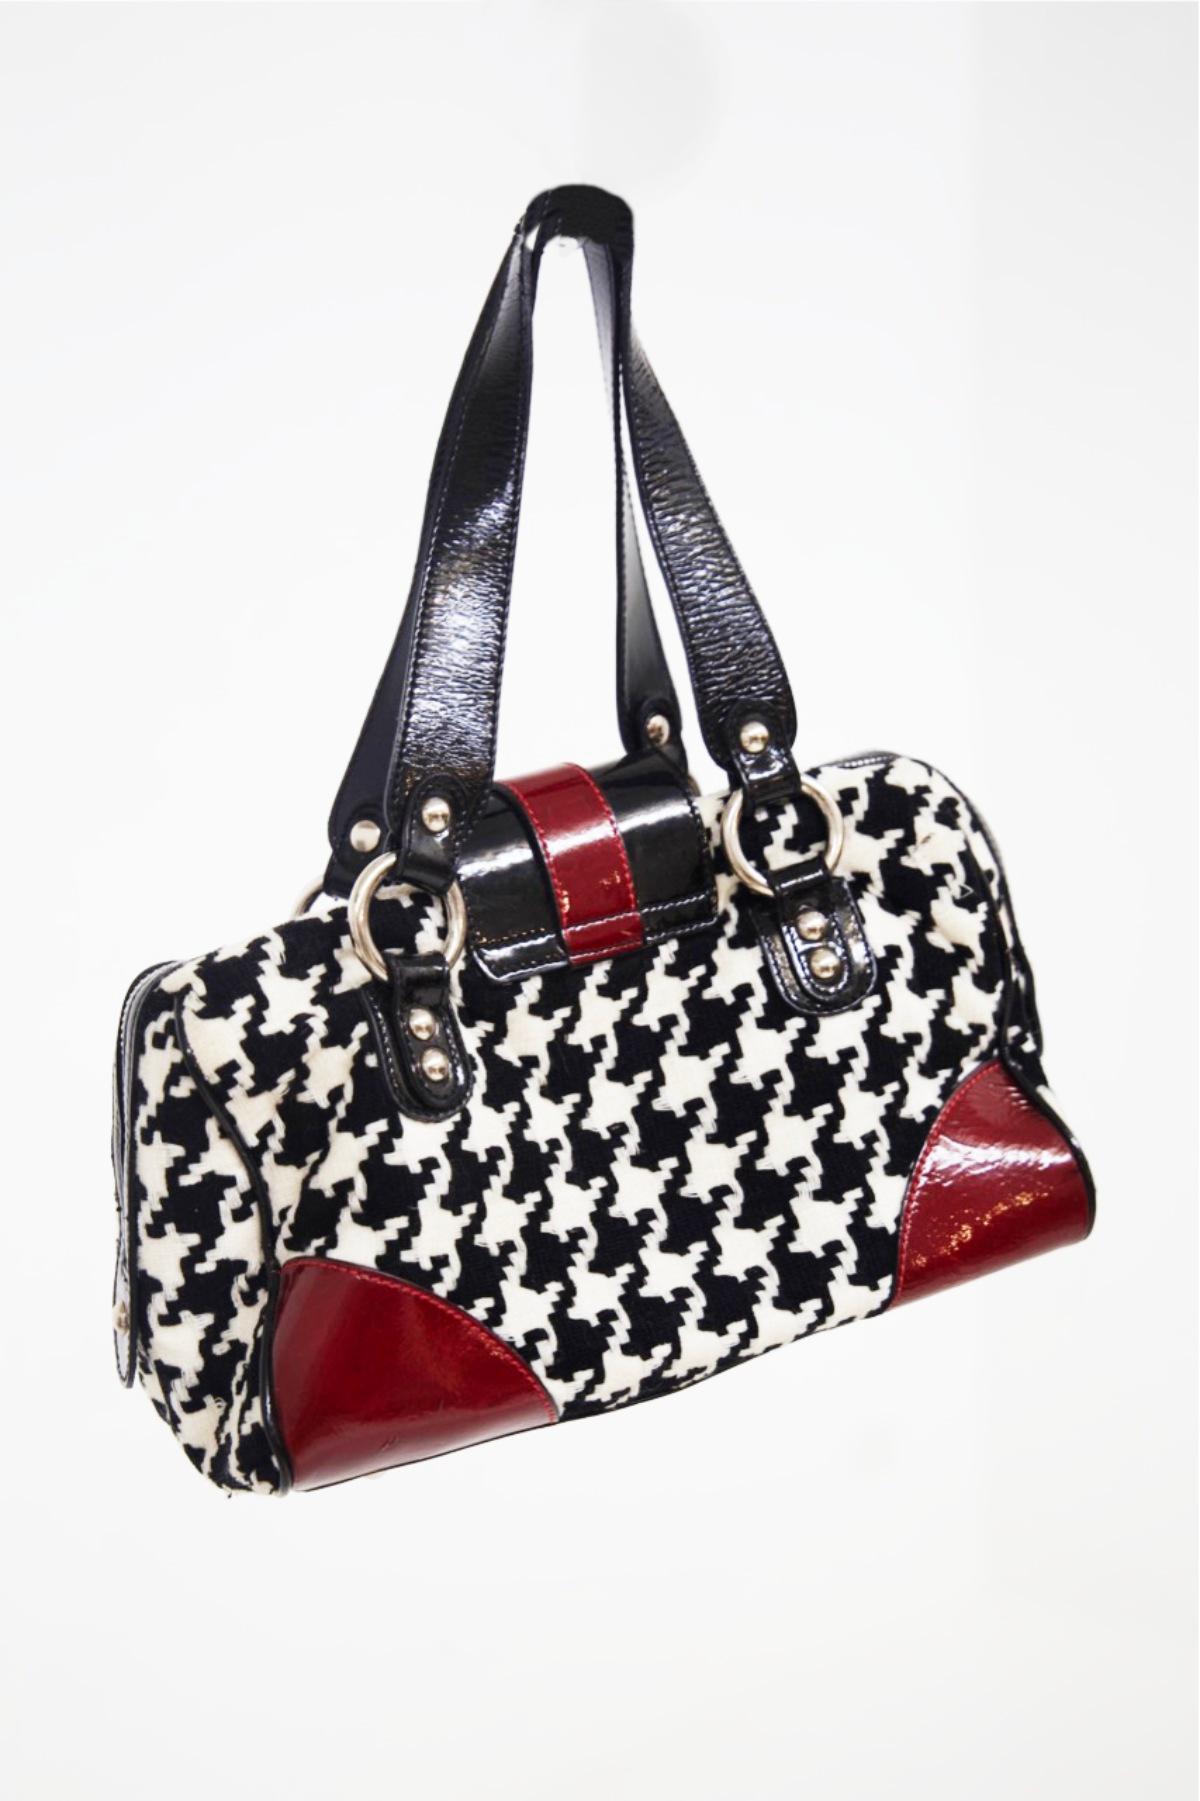 Rocco Barocco Vintage Handbag in Patent and Houndstooth For Sale 1